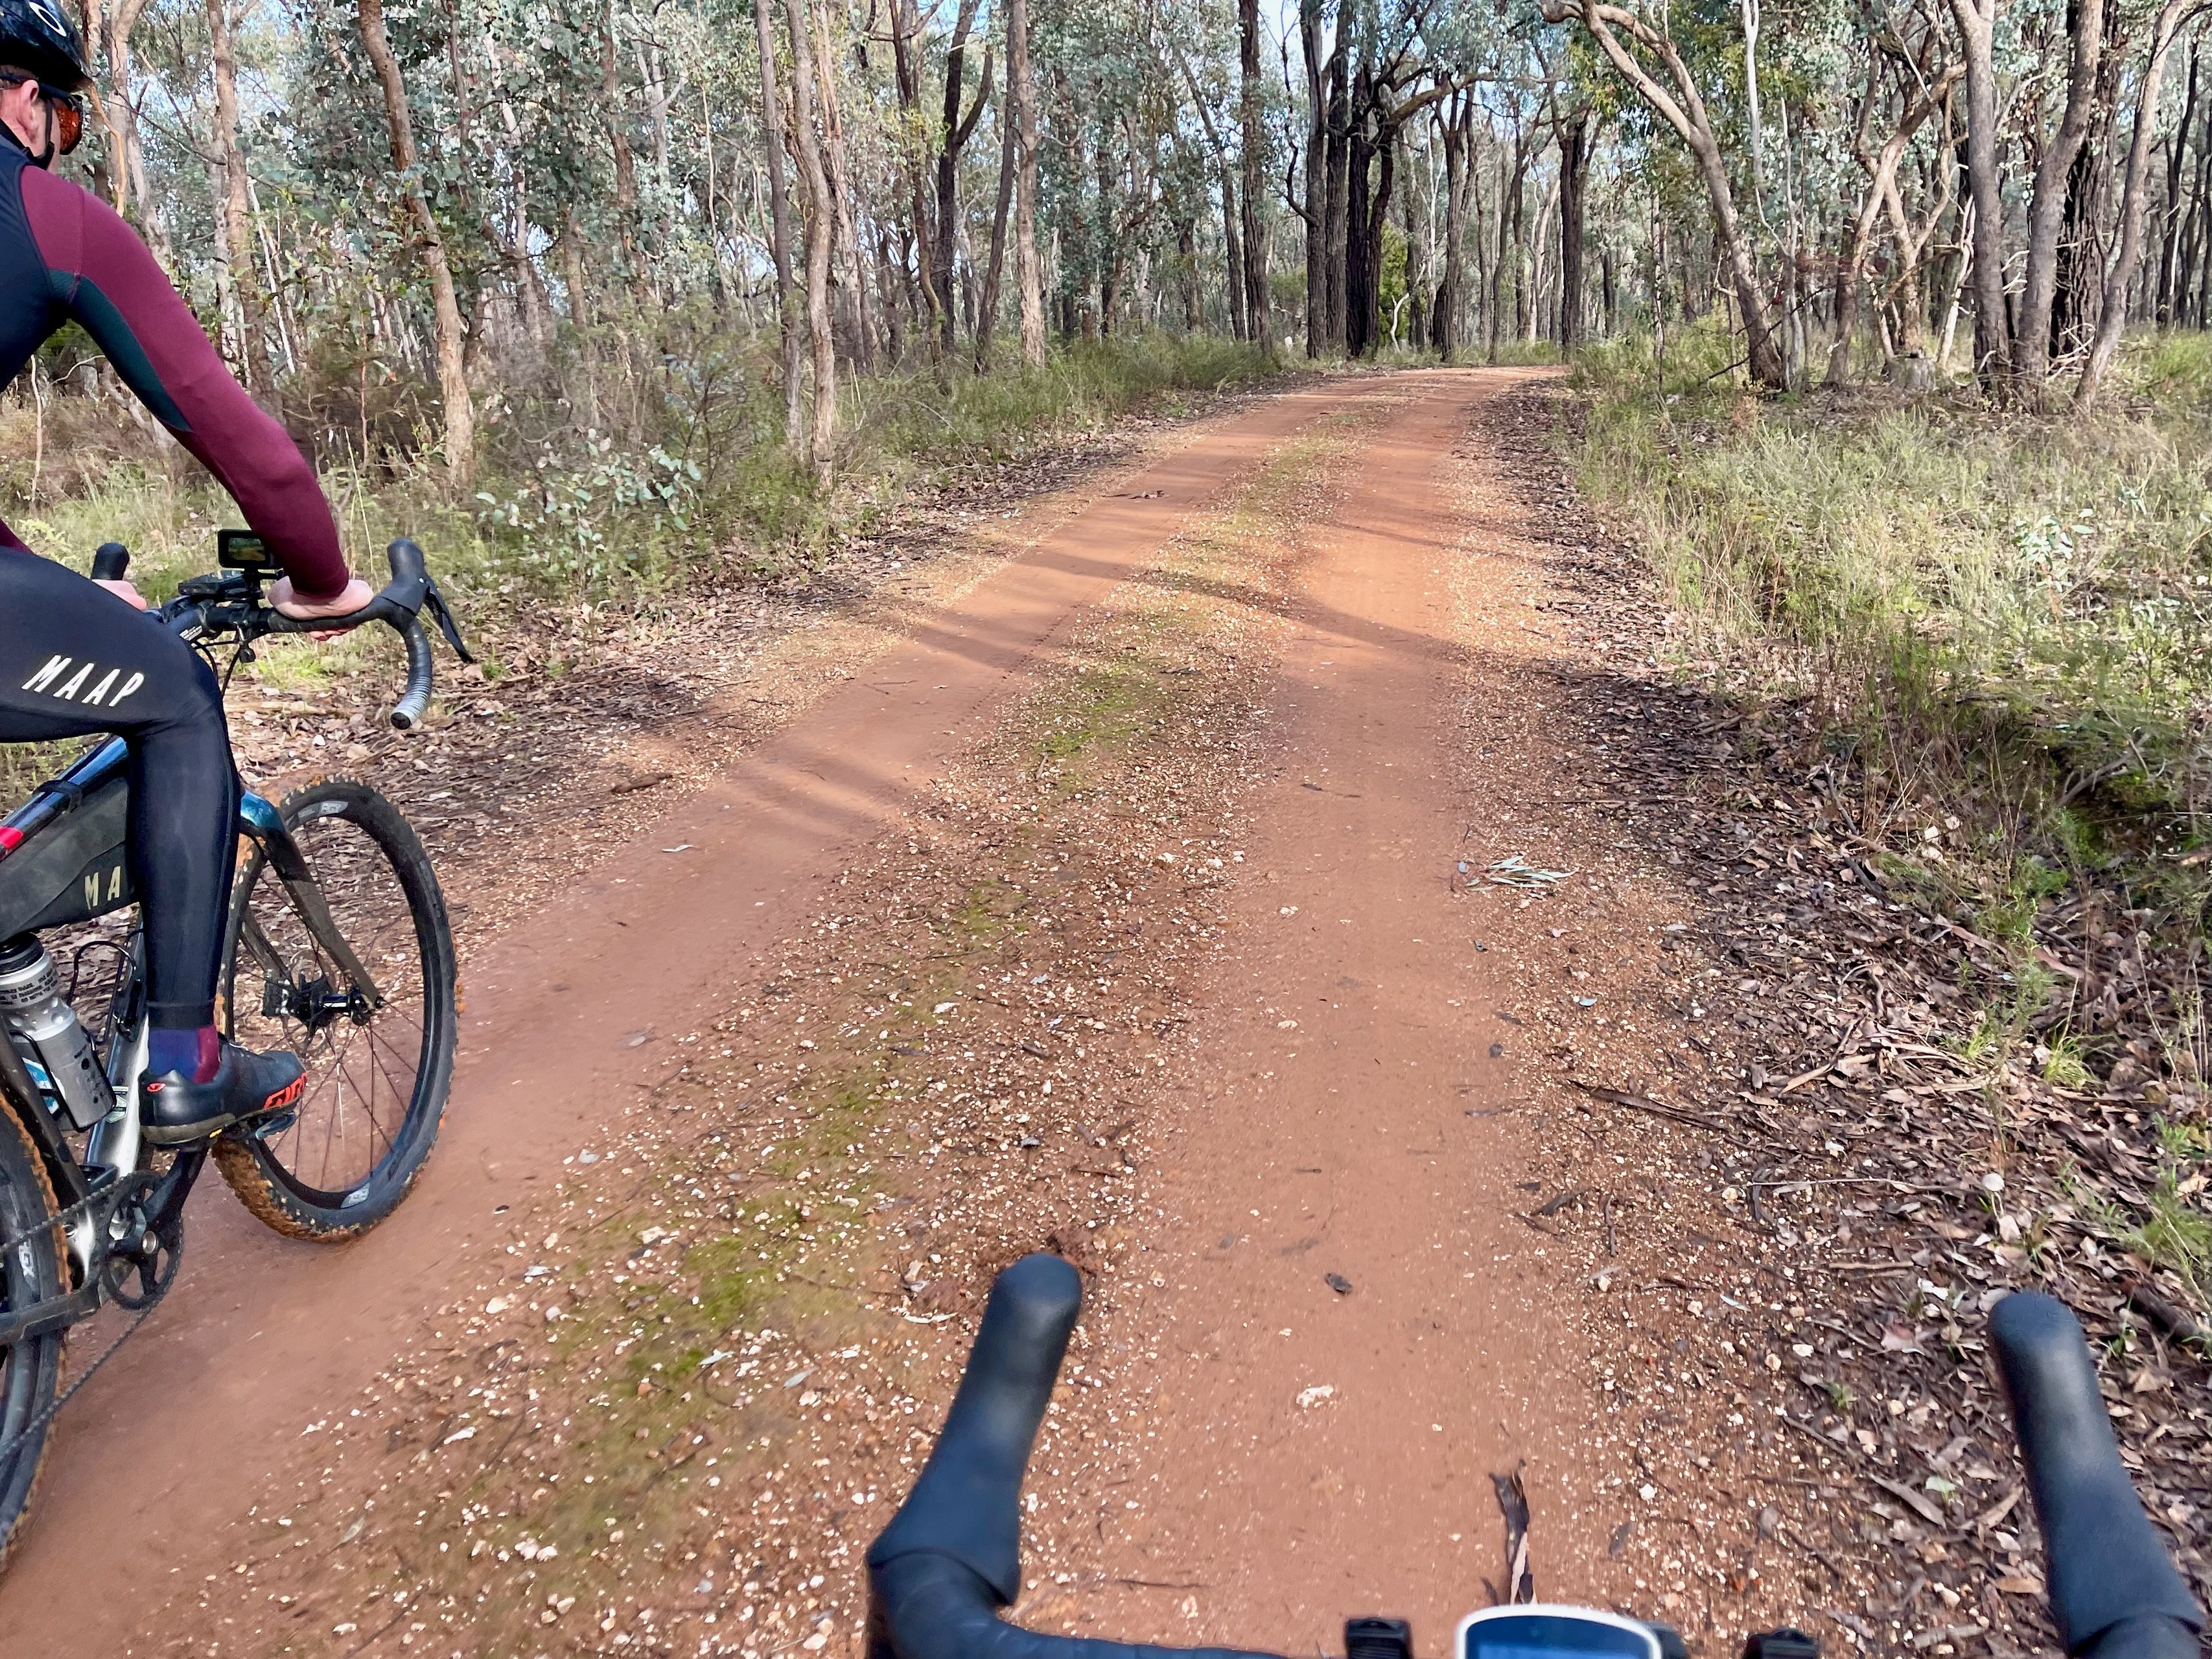 Cyclists riding through a native forest on a red smooth dirt road